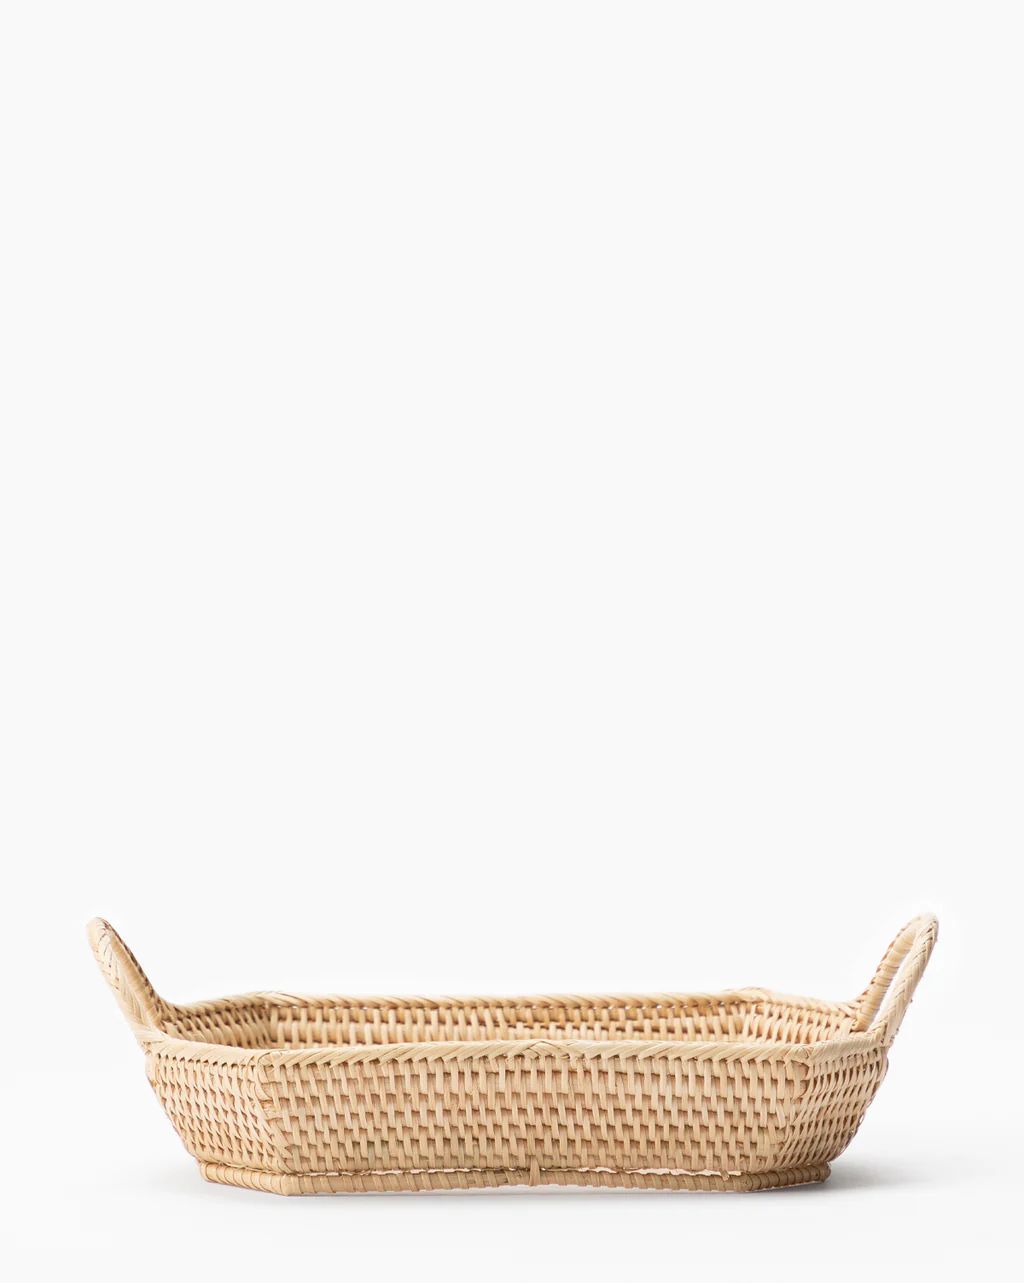 Cane Handled Tray | McGee & Co.